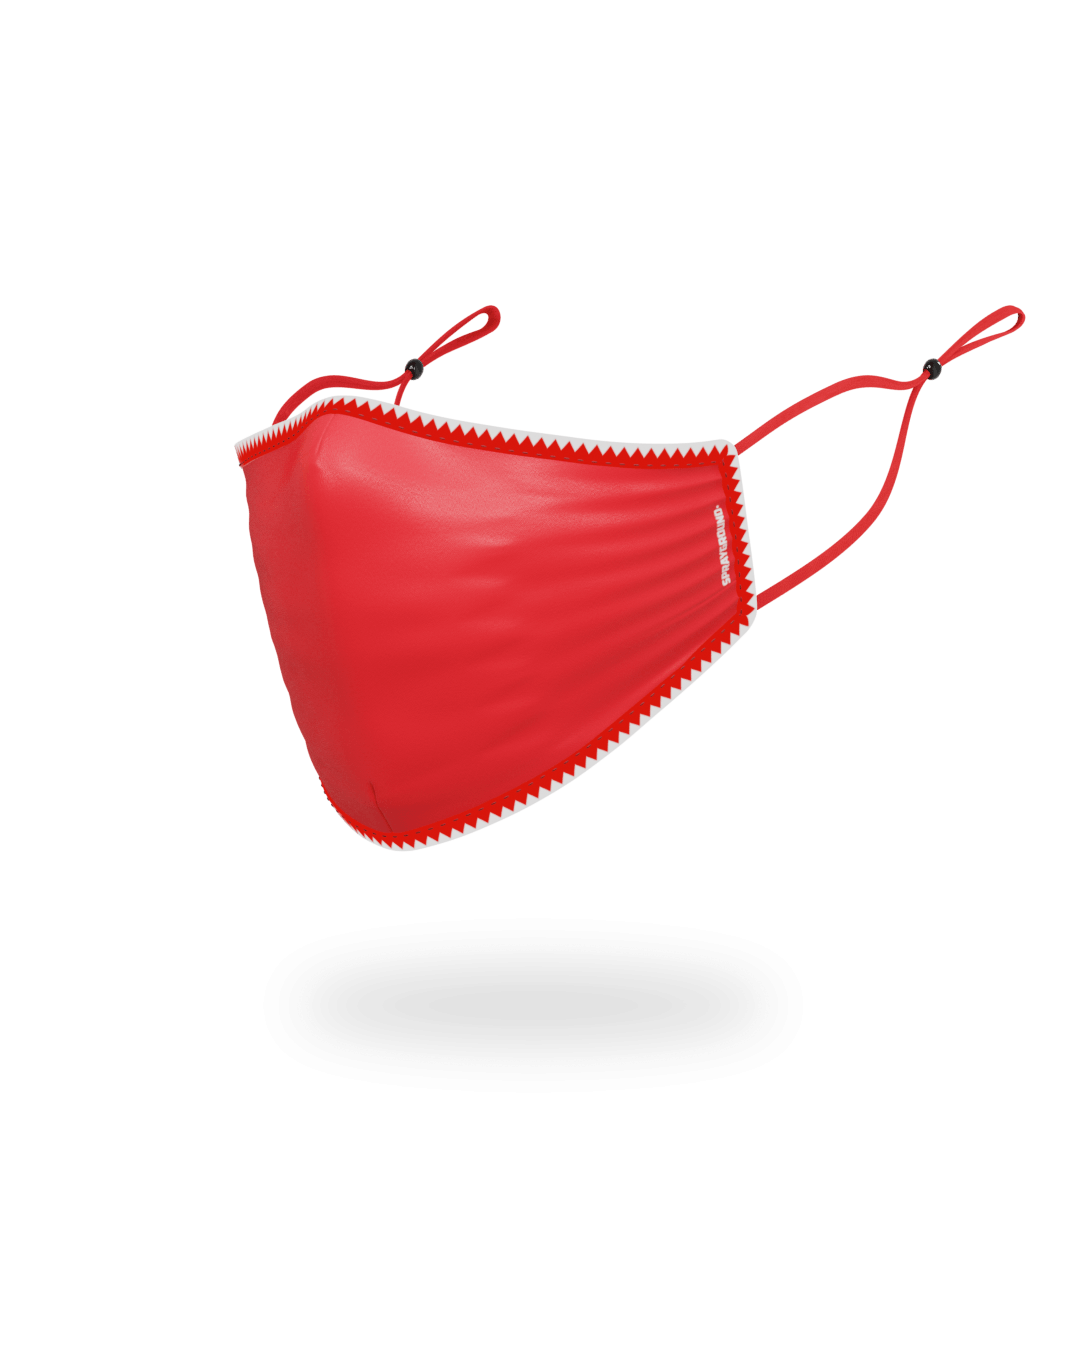 Discount | Adult Vertical Shark (Red) Form-Fitting Face Mask Sprayground Sale - Discount | Adult Vertical Shark (Red) Form-Fitting Face Mask Sprayground Sale-01-1